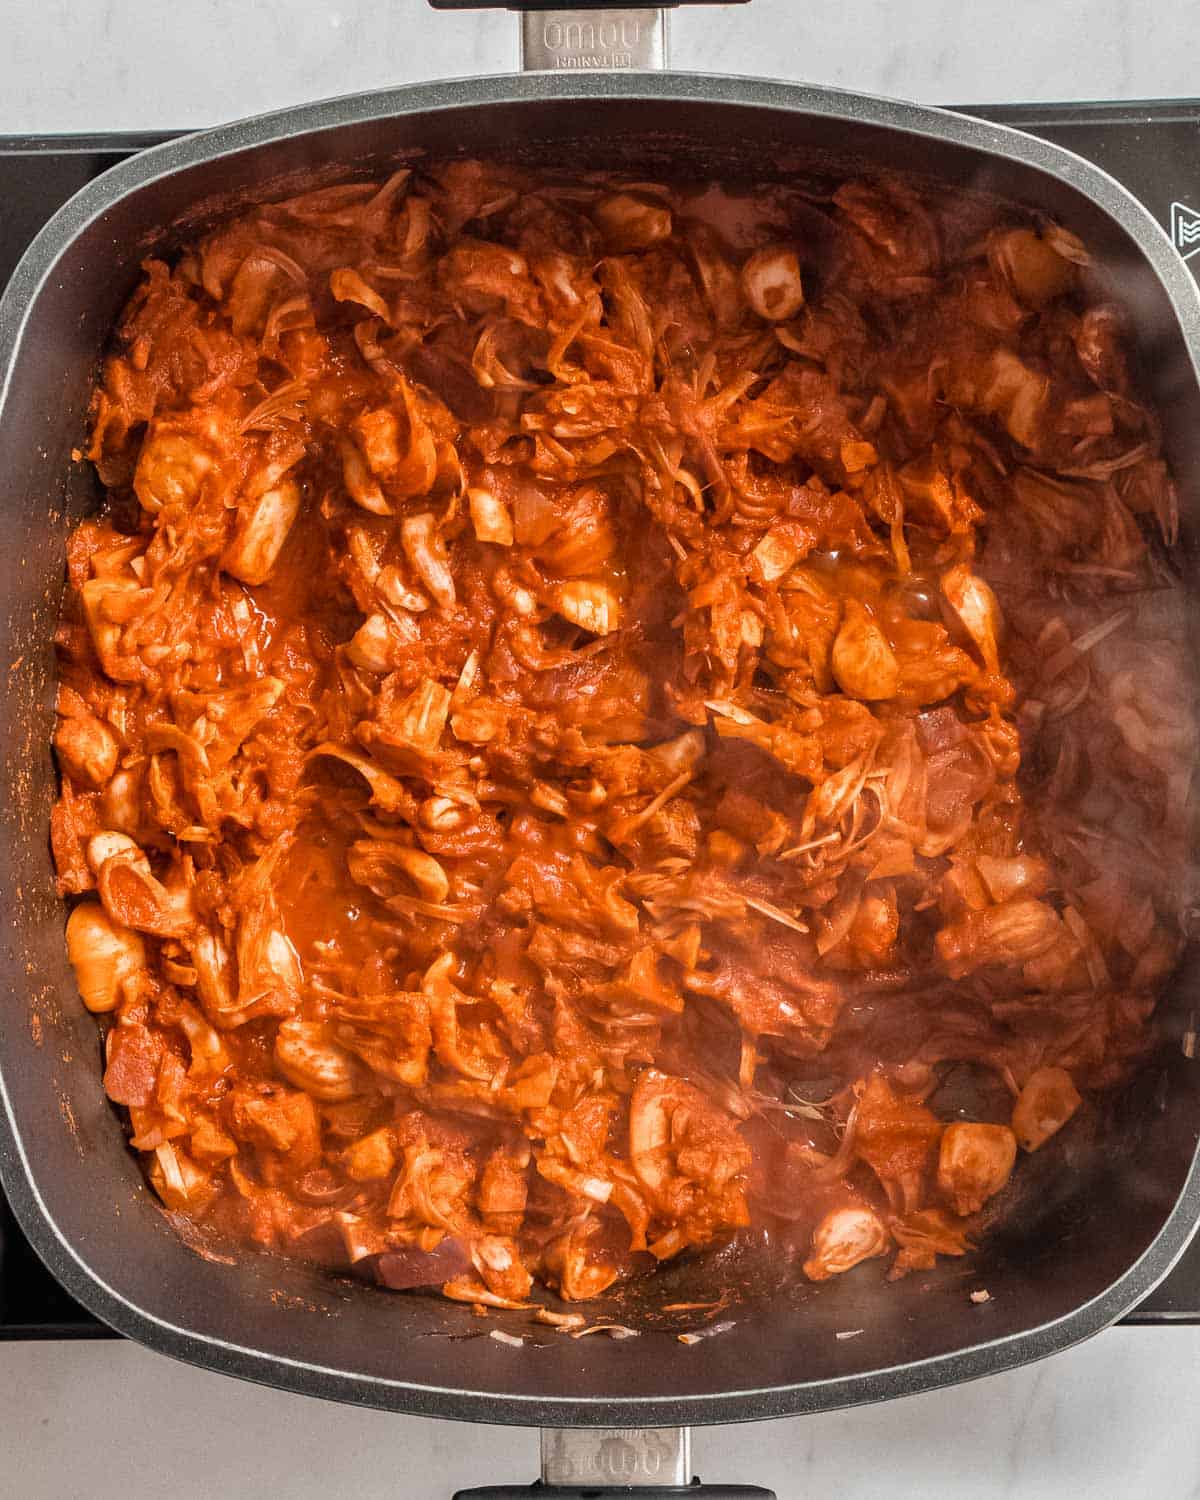 finished birria jackfruit sauce with jackfruits simmering in a large frying pan.